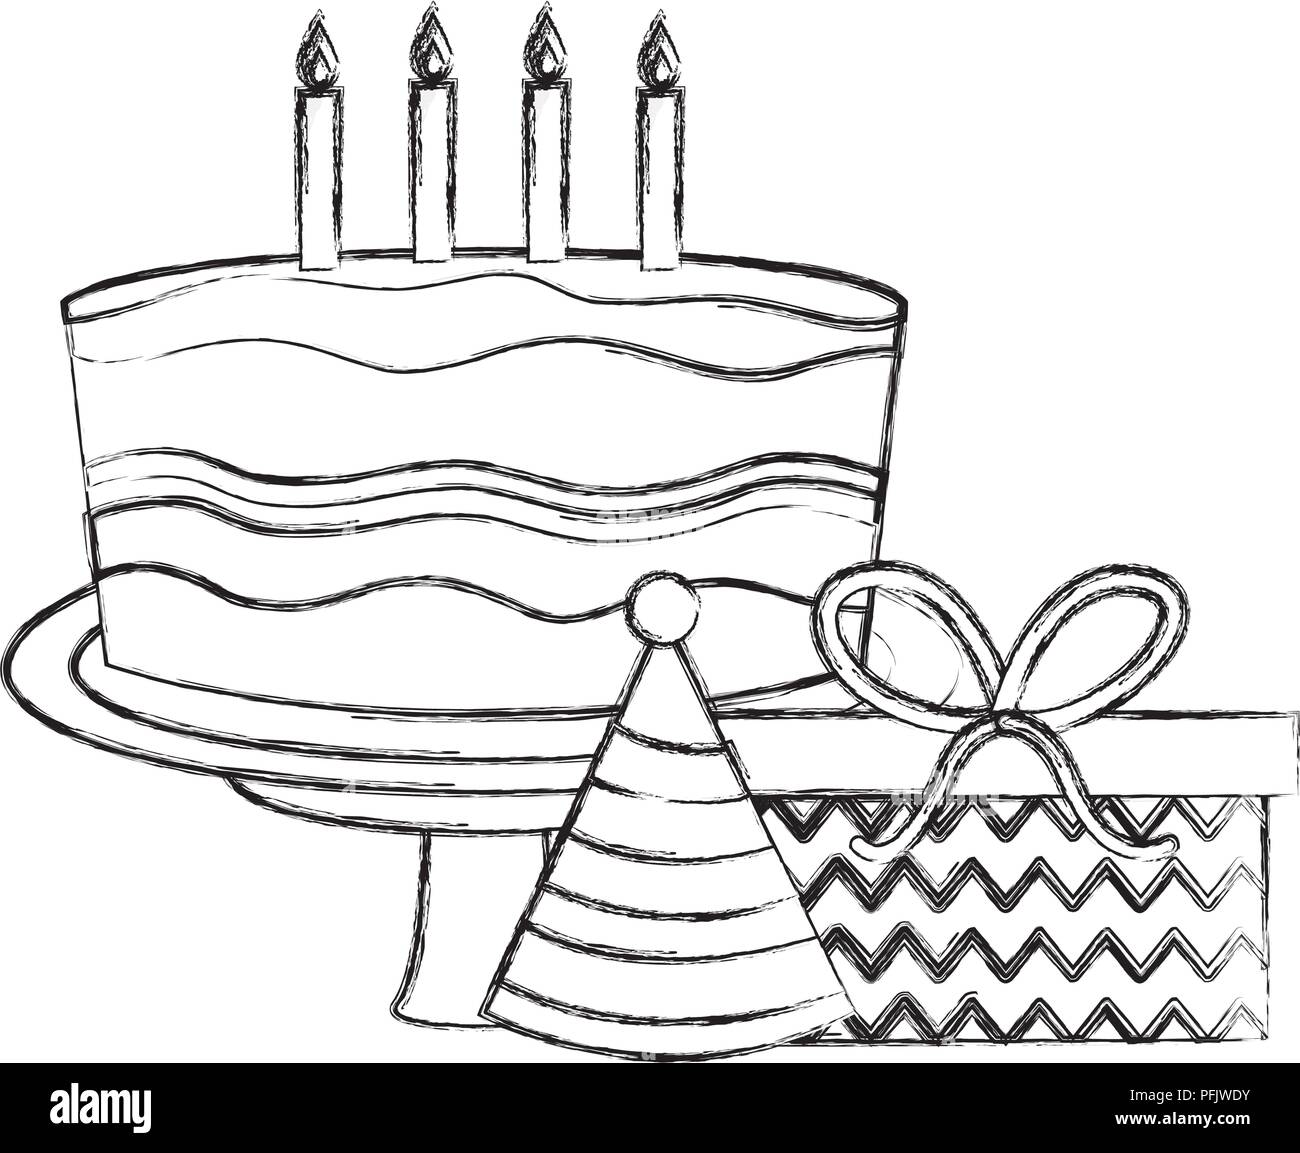 Cartoon candles Black and White Stock Photos & Images - Alamy